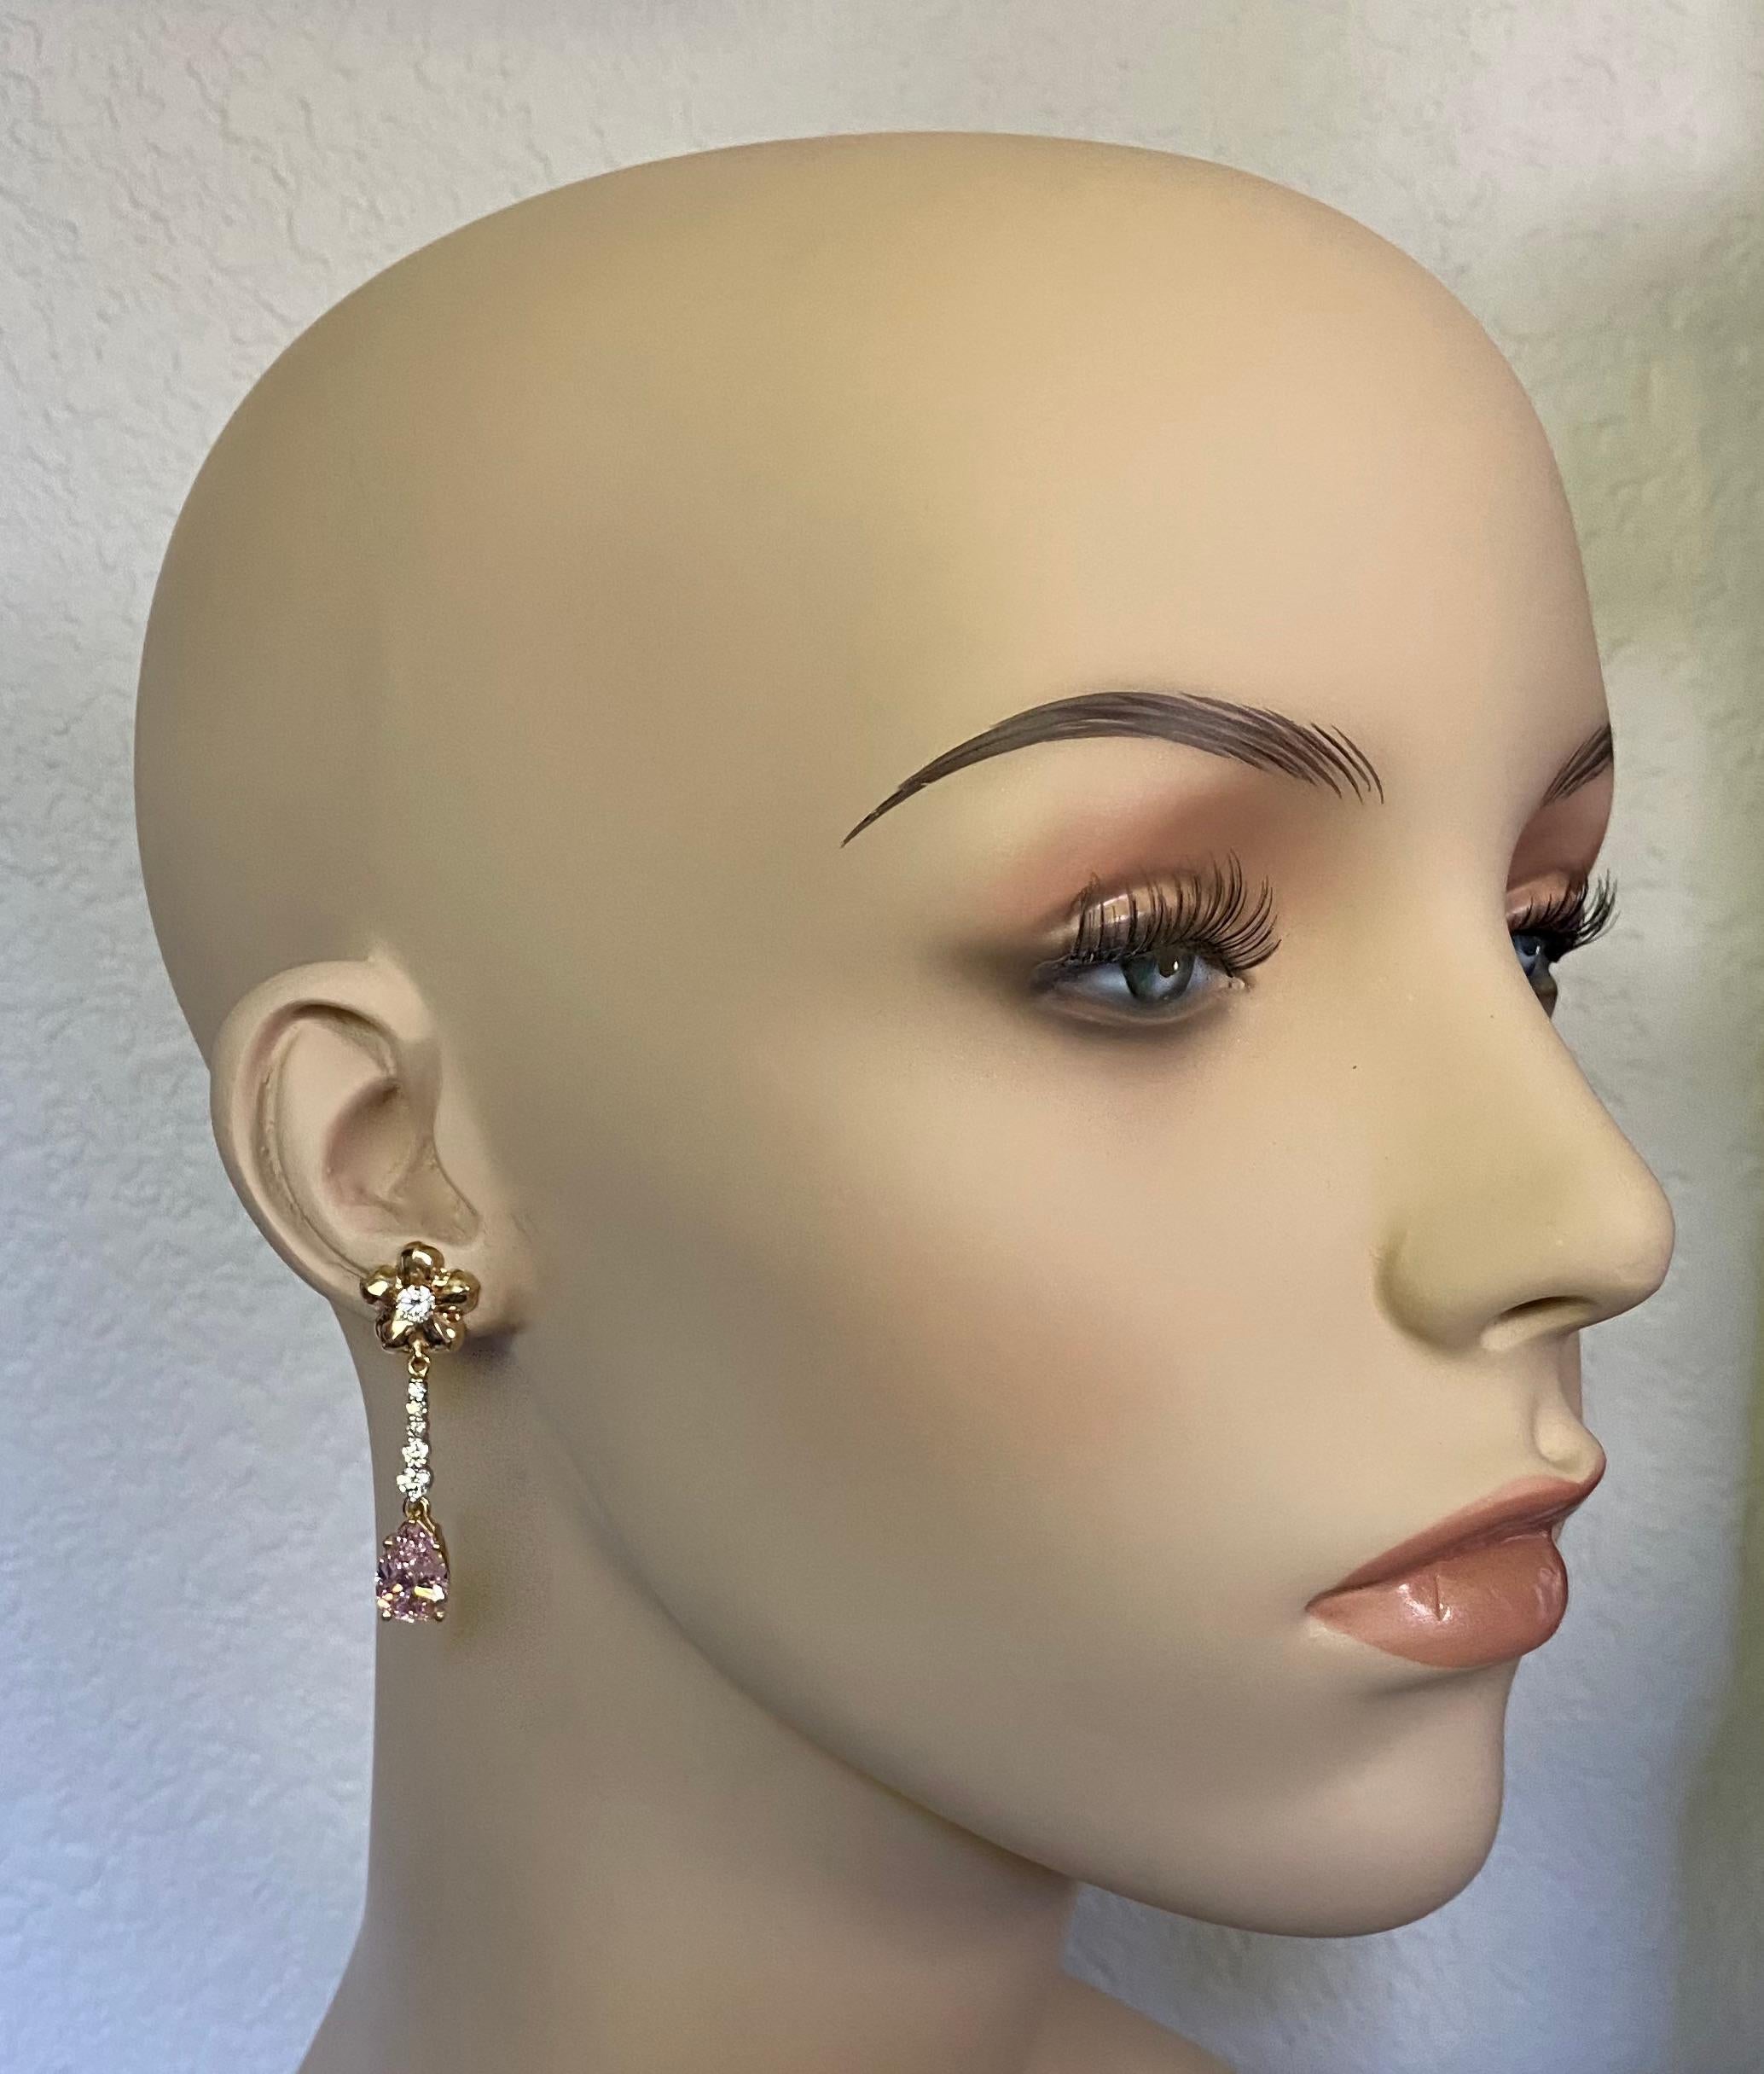 Kunzite is featured in those dainty dangle earrings. Kunzite (origin: San Diego County, California) is the best known member of the spodumene family of gems.  It is revered for its delicate pink color.  The exceptionally well cut pear shapes are